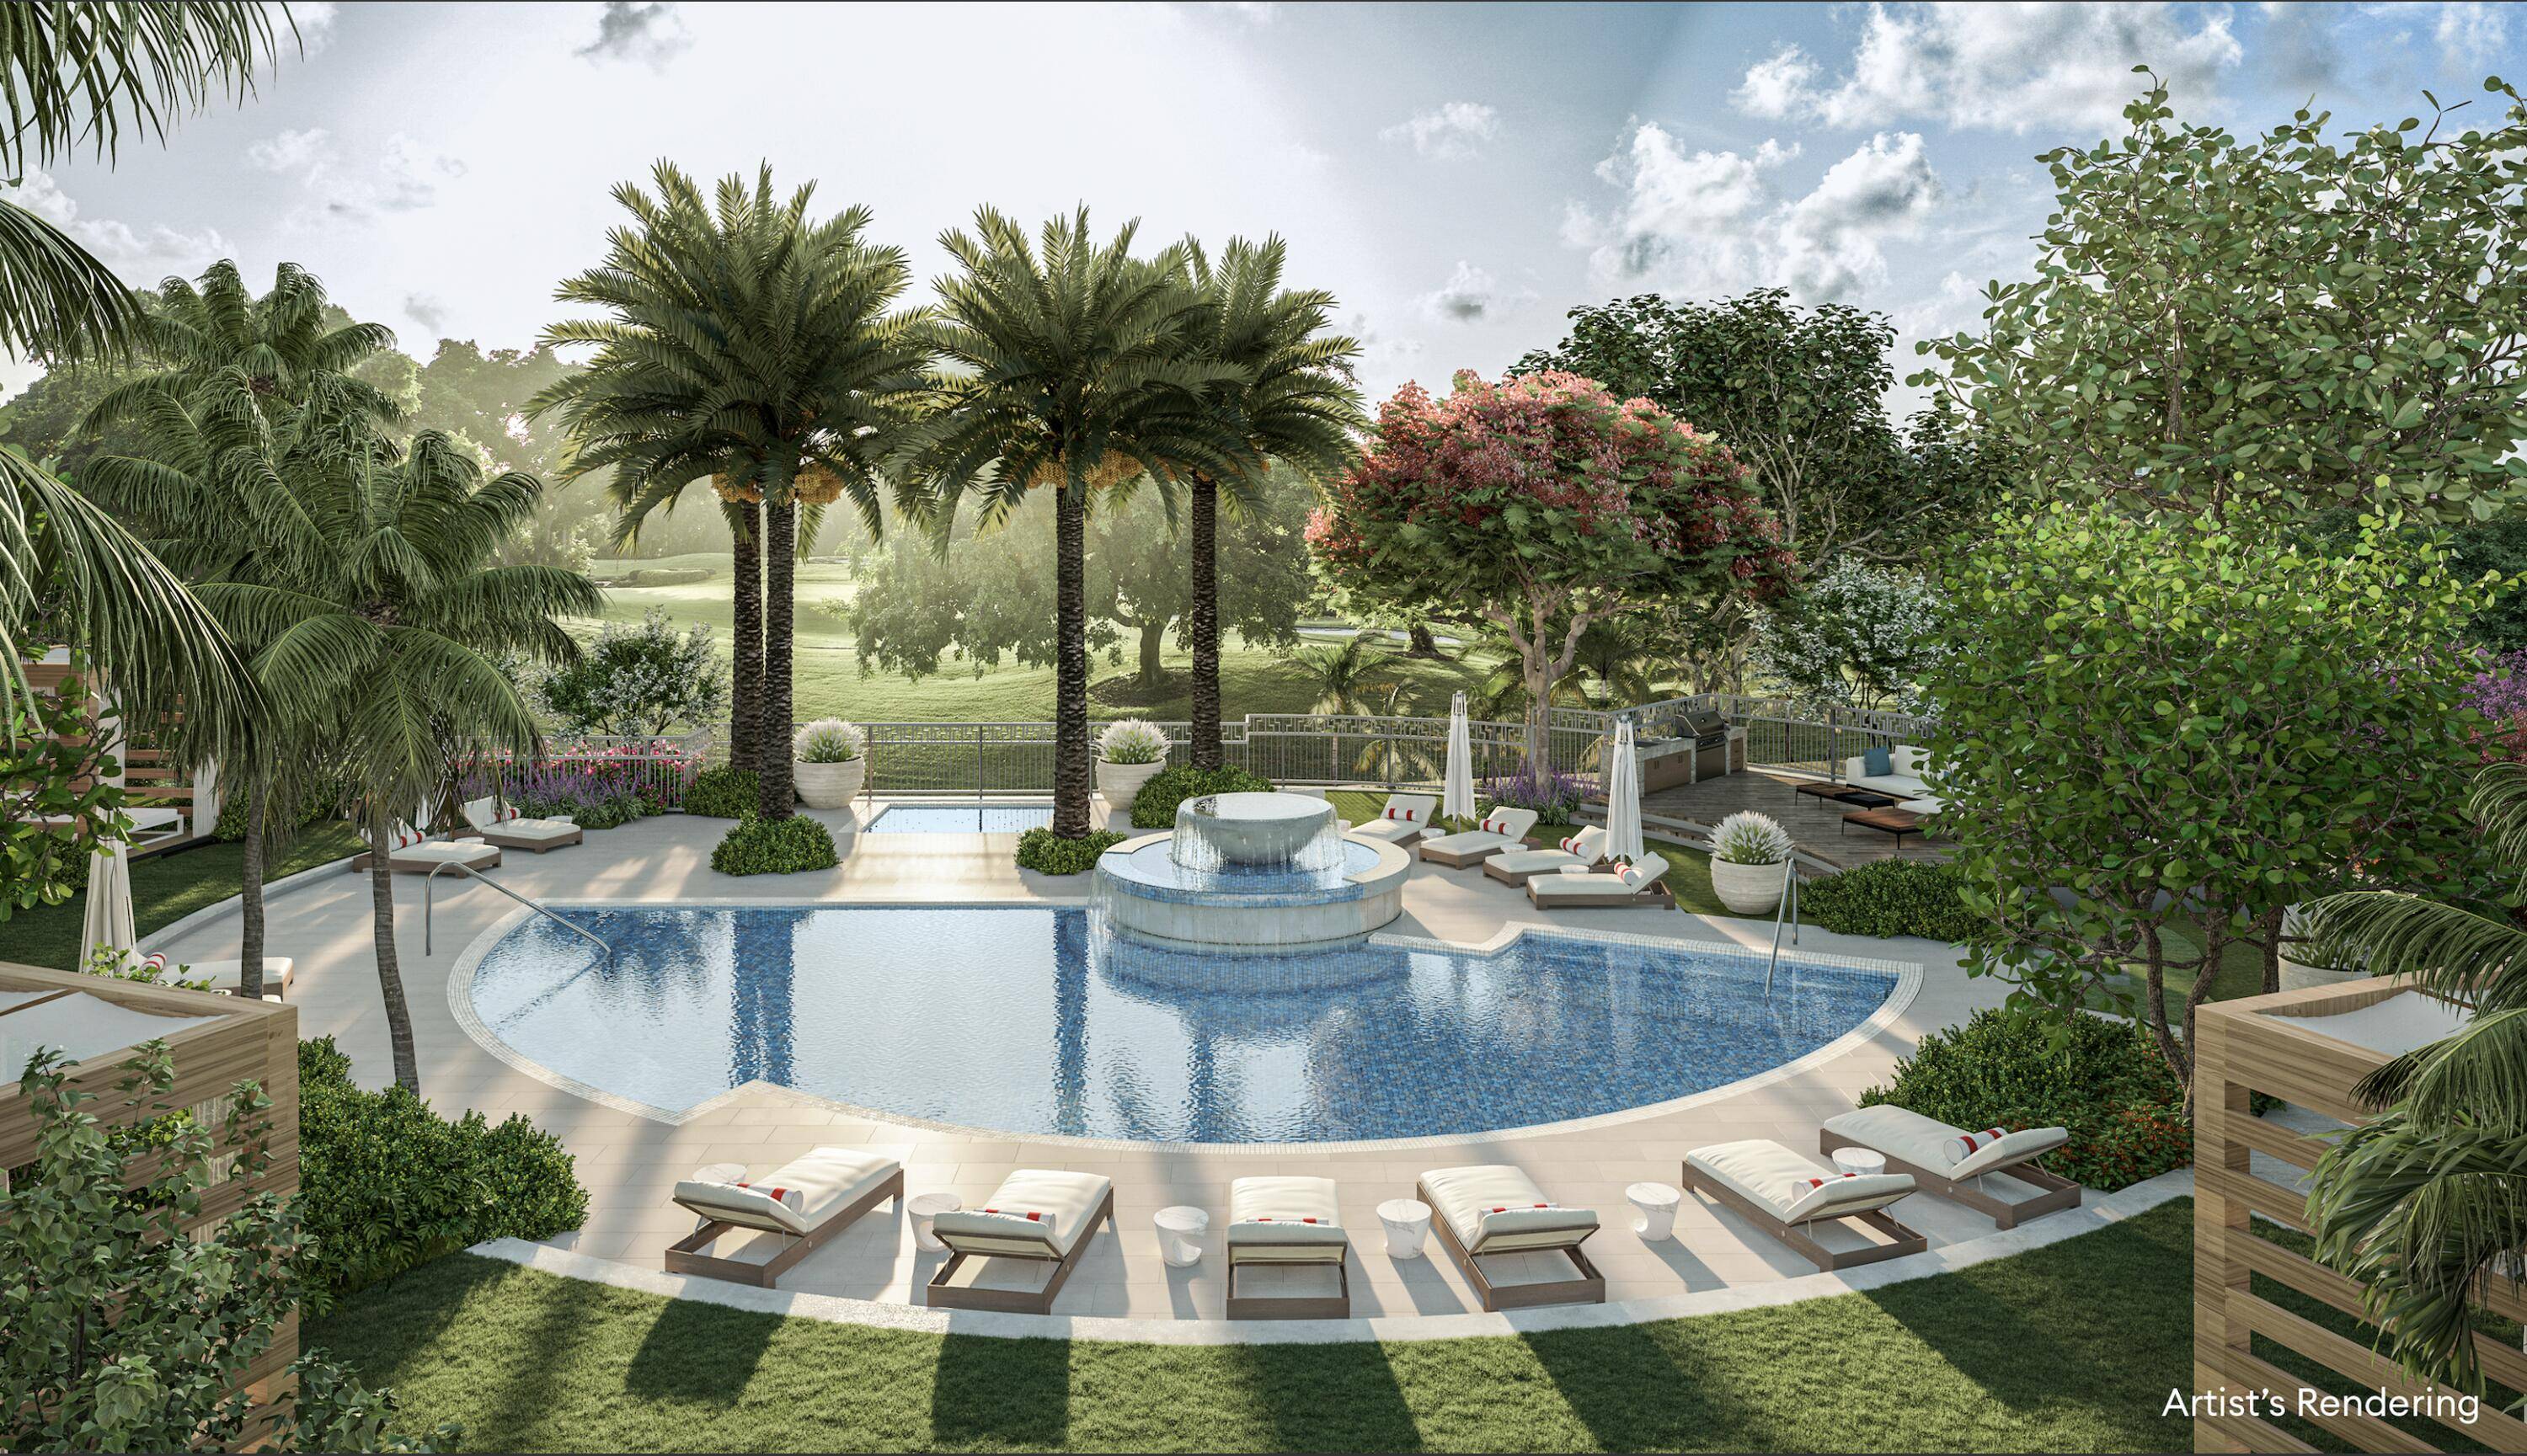 The hottest downtown Boca Raton luxury pre construction opportunity is ALINA.